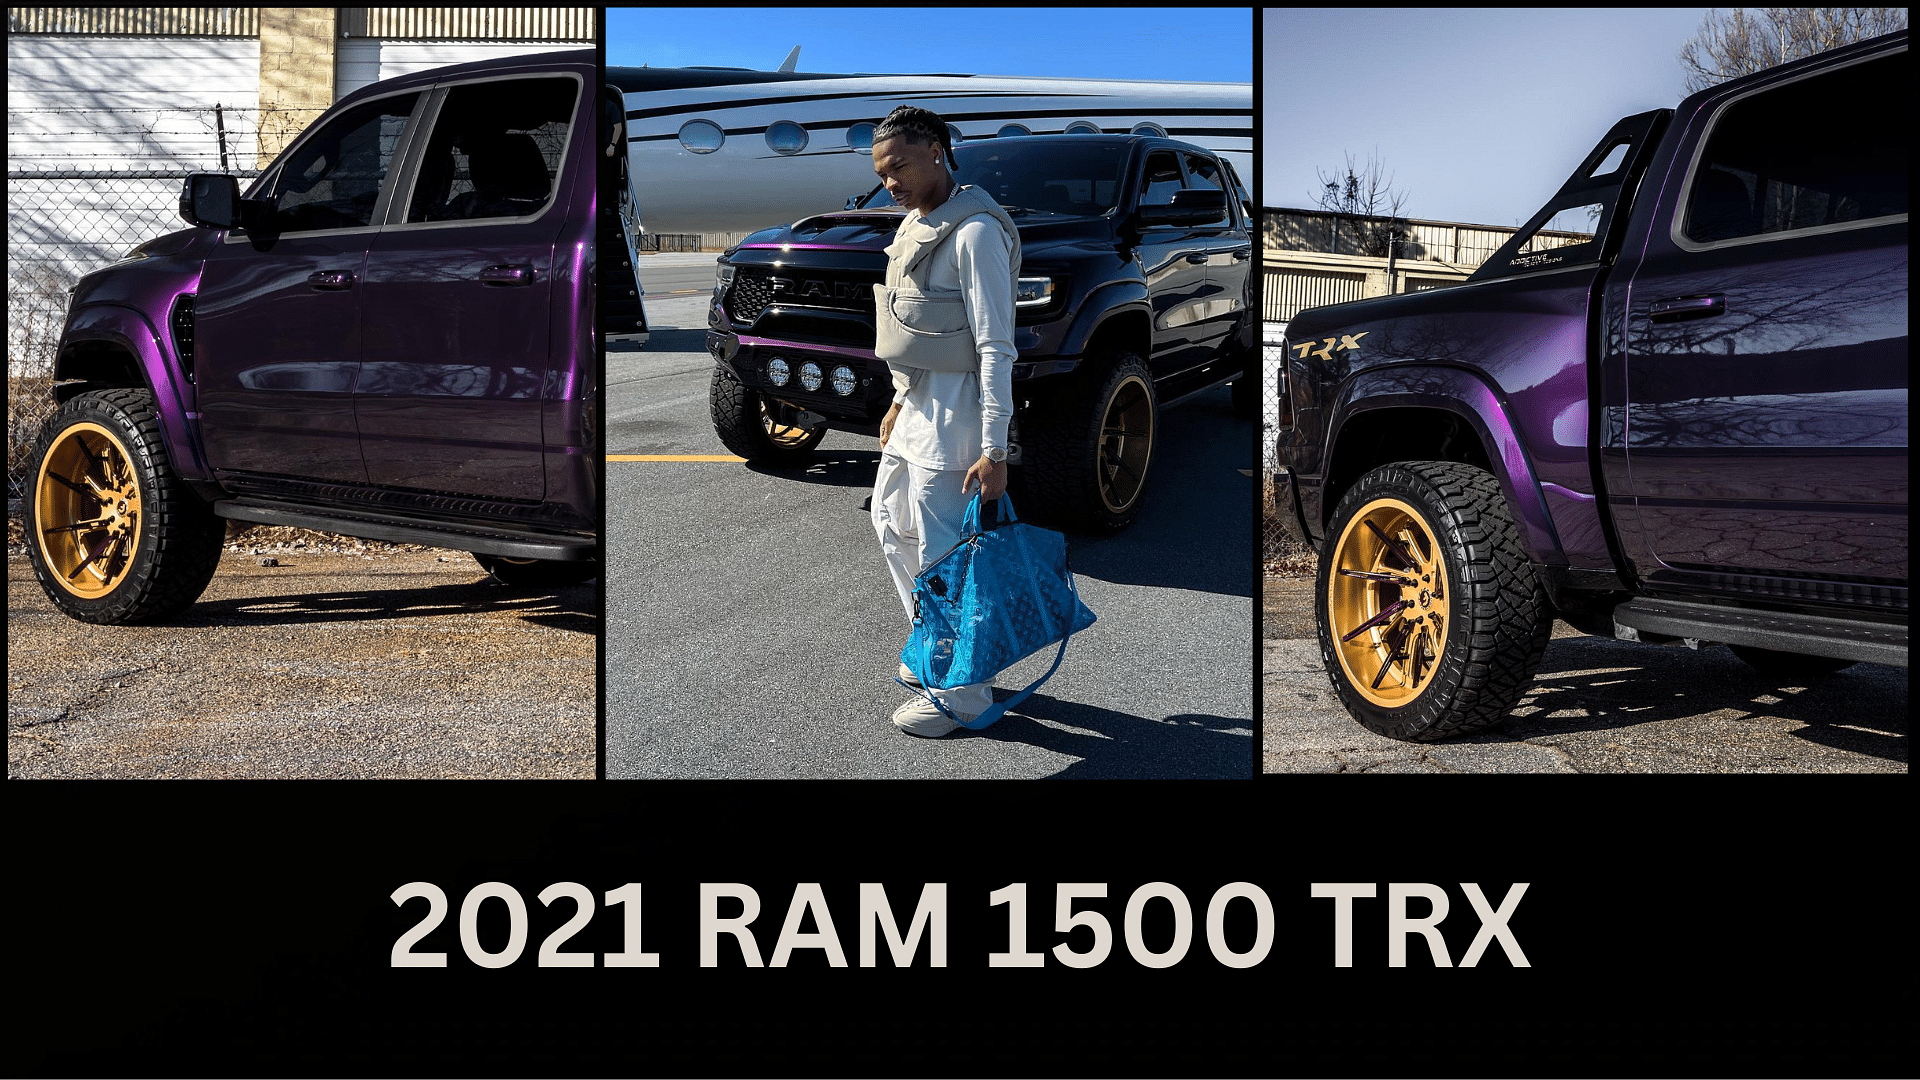 Lil Baby standing in front of his purple 2021 RAM 1500 TRX